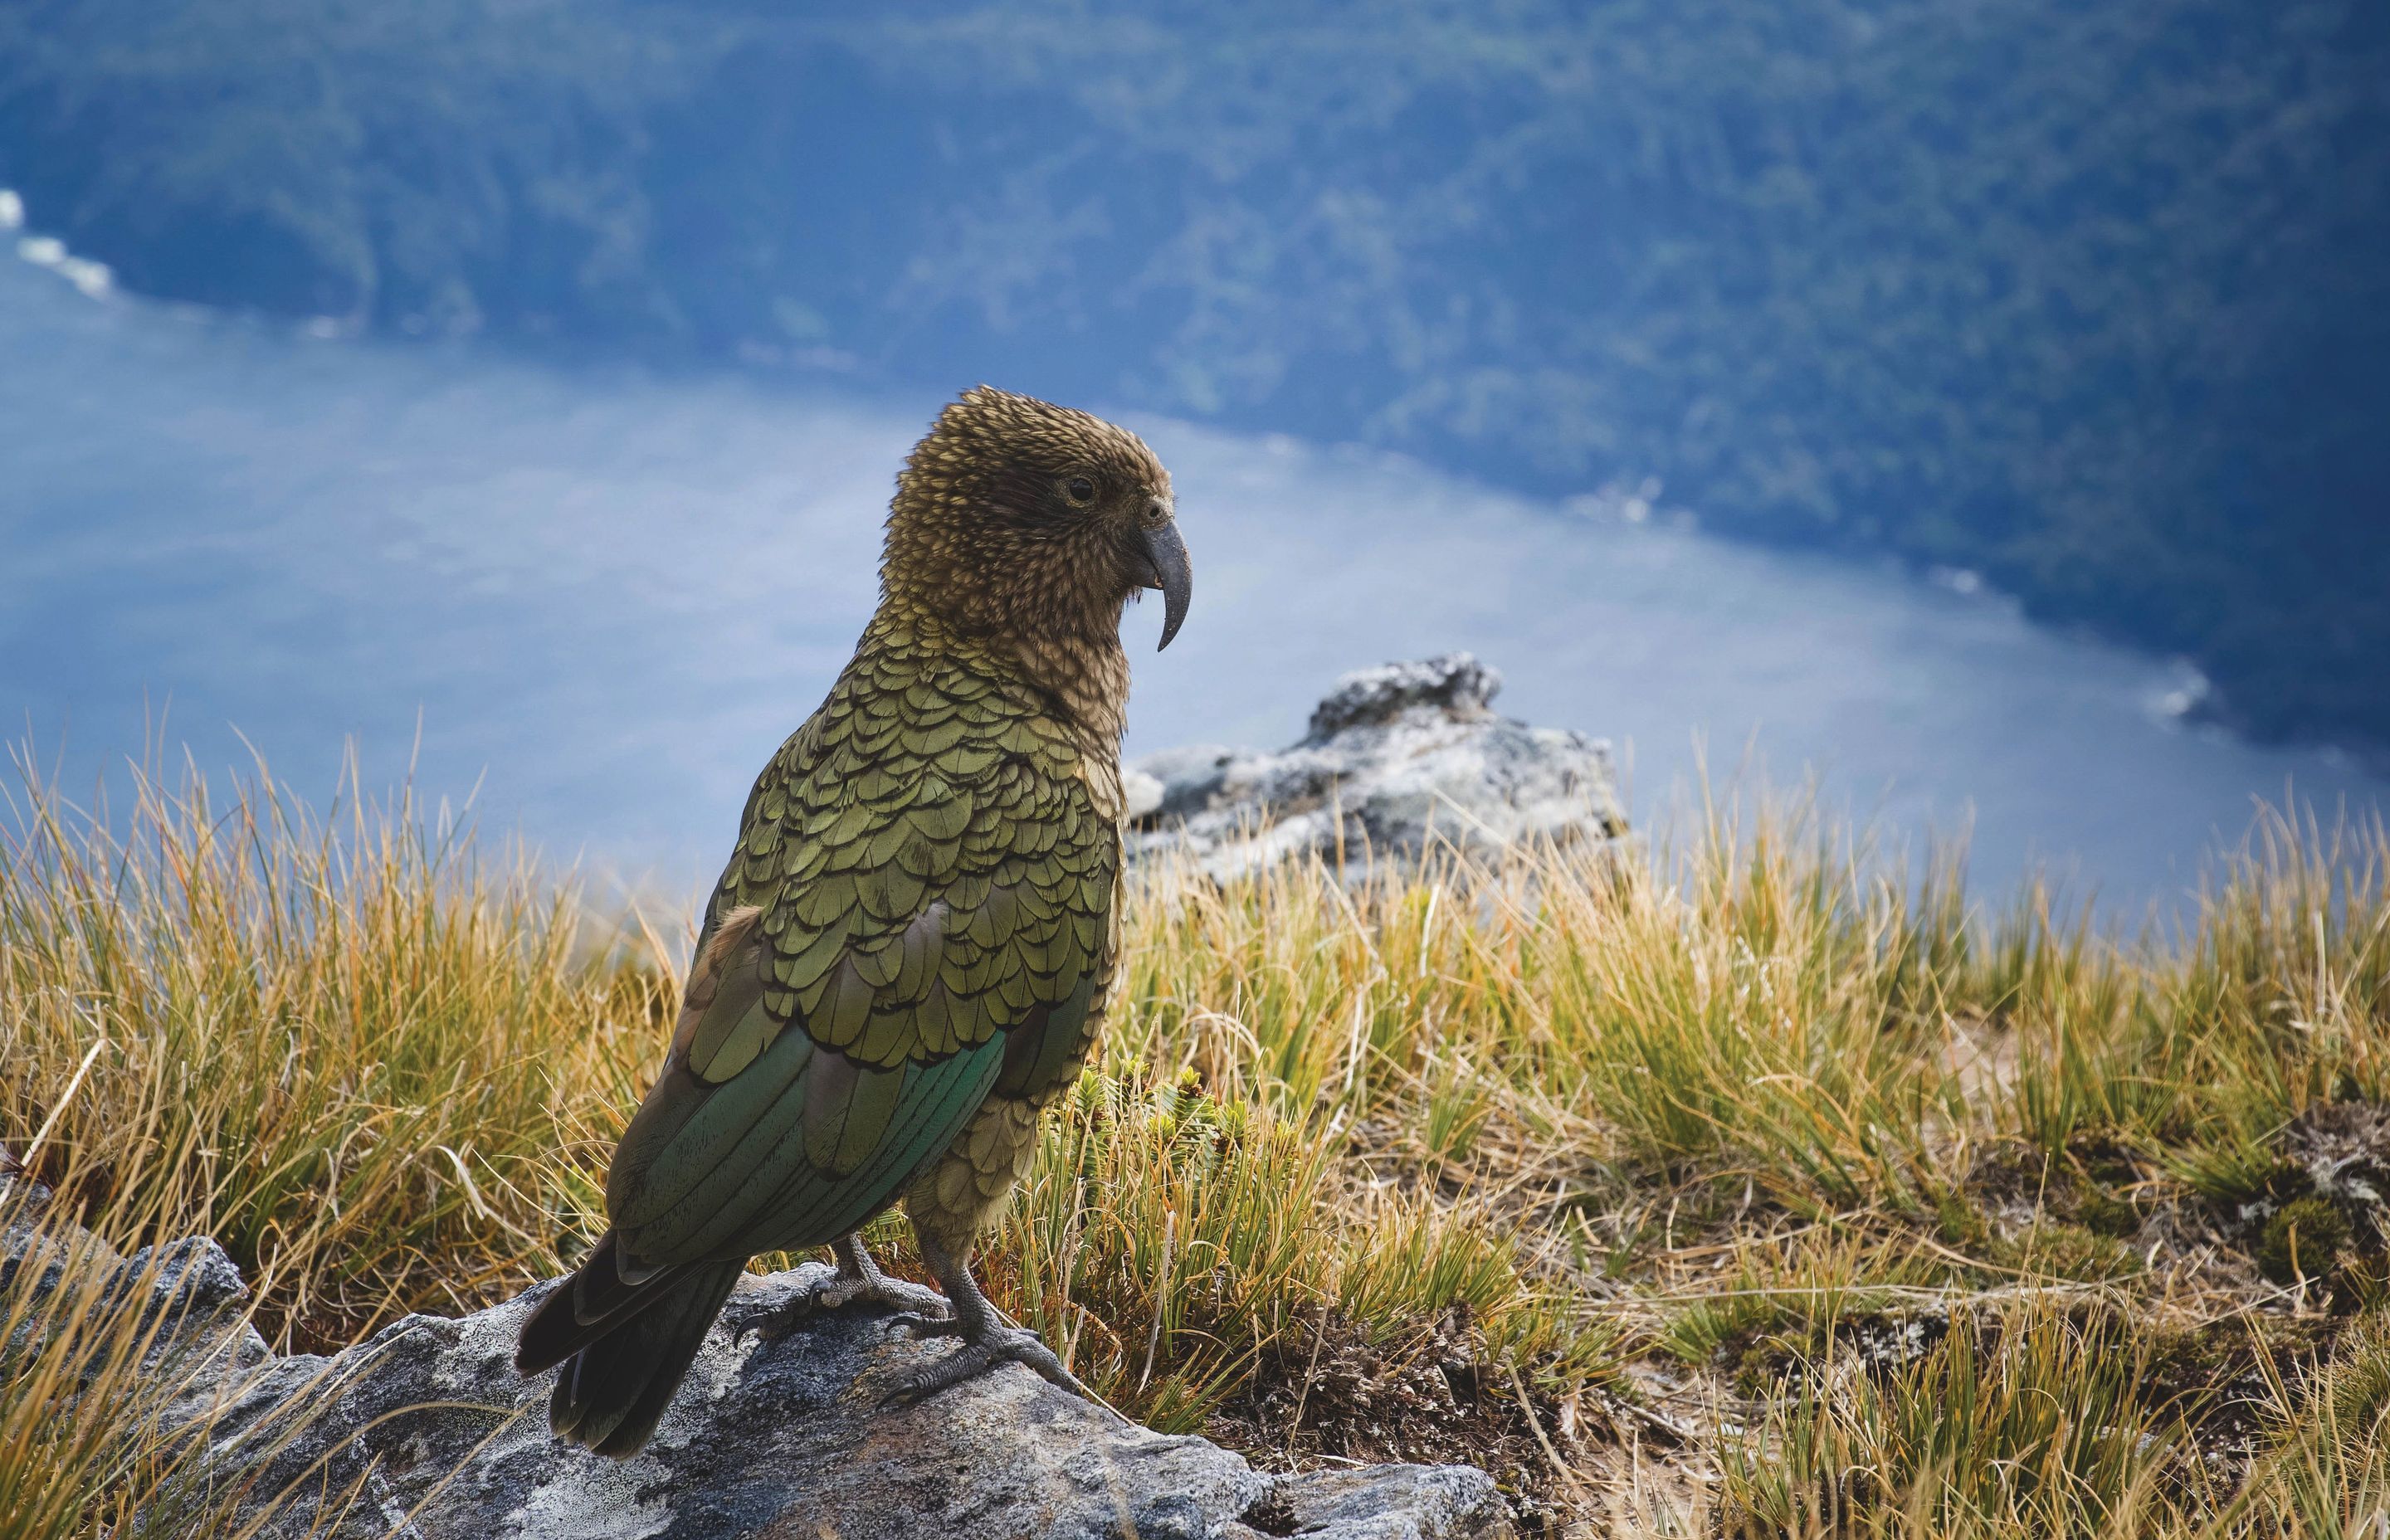 The Kea Conservation Trust (KCT) is a charity dedicated to protecting and preserving kea in their natural habitats.